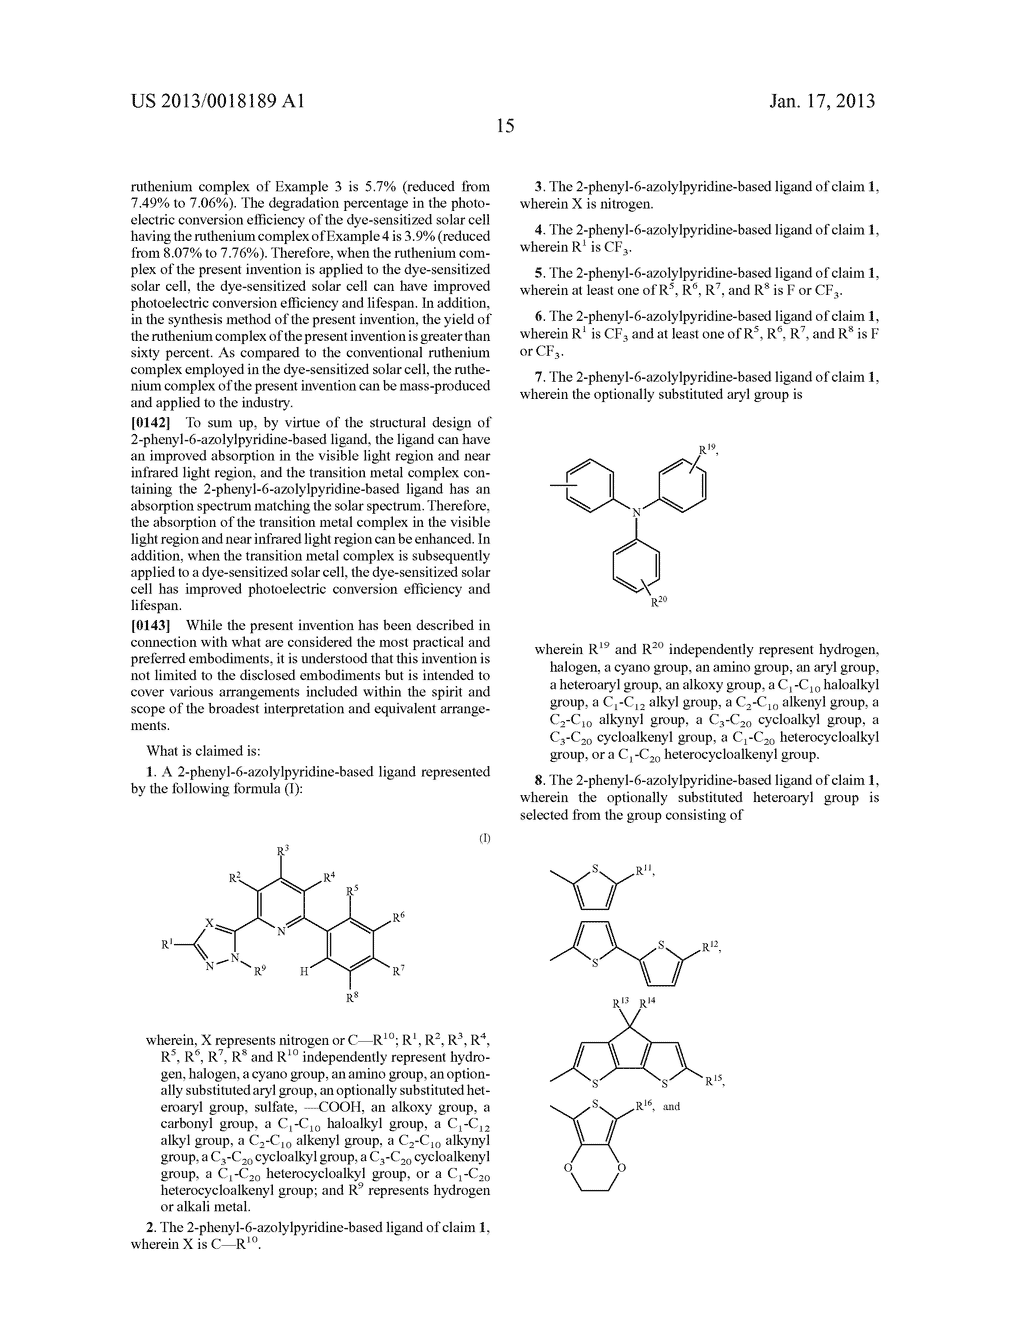 2-PHENYL-6-AZOLYLPYRIDINE-BASED LIGAND AND GROUP VIII TRANSITION METAL     COMPLEX - diagram, schematic, and image 18